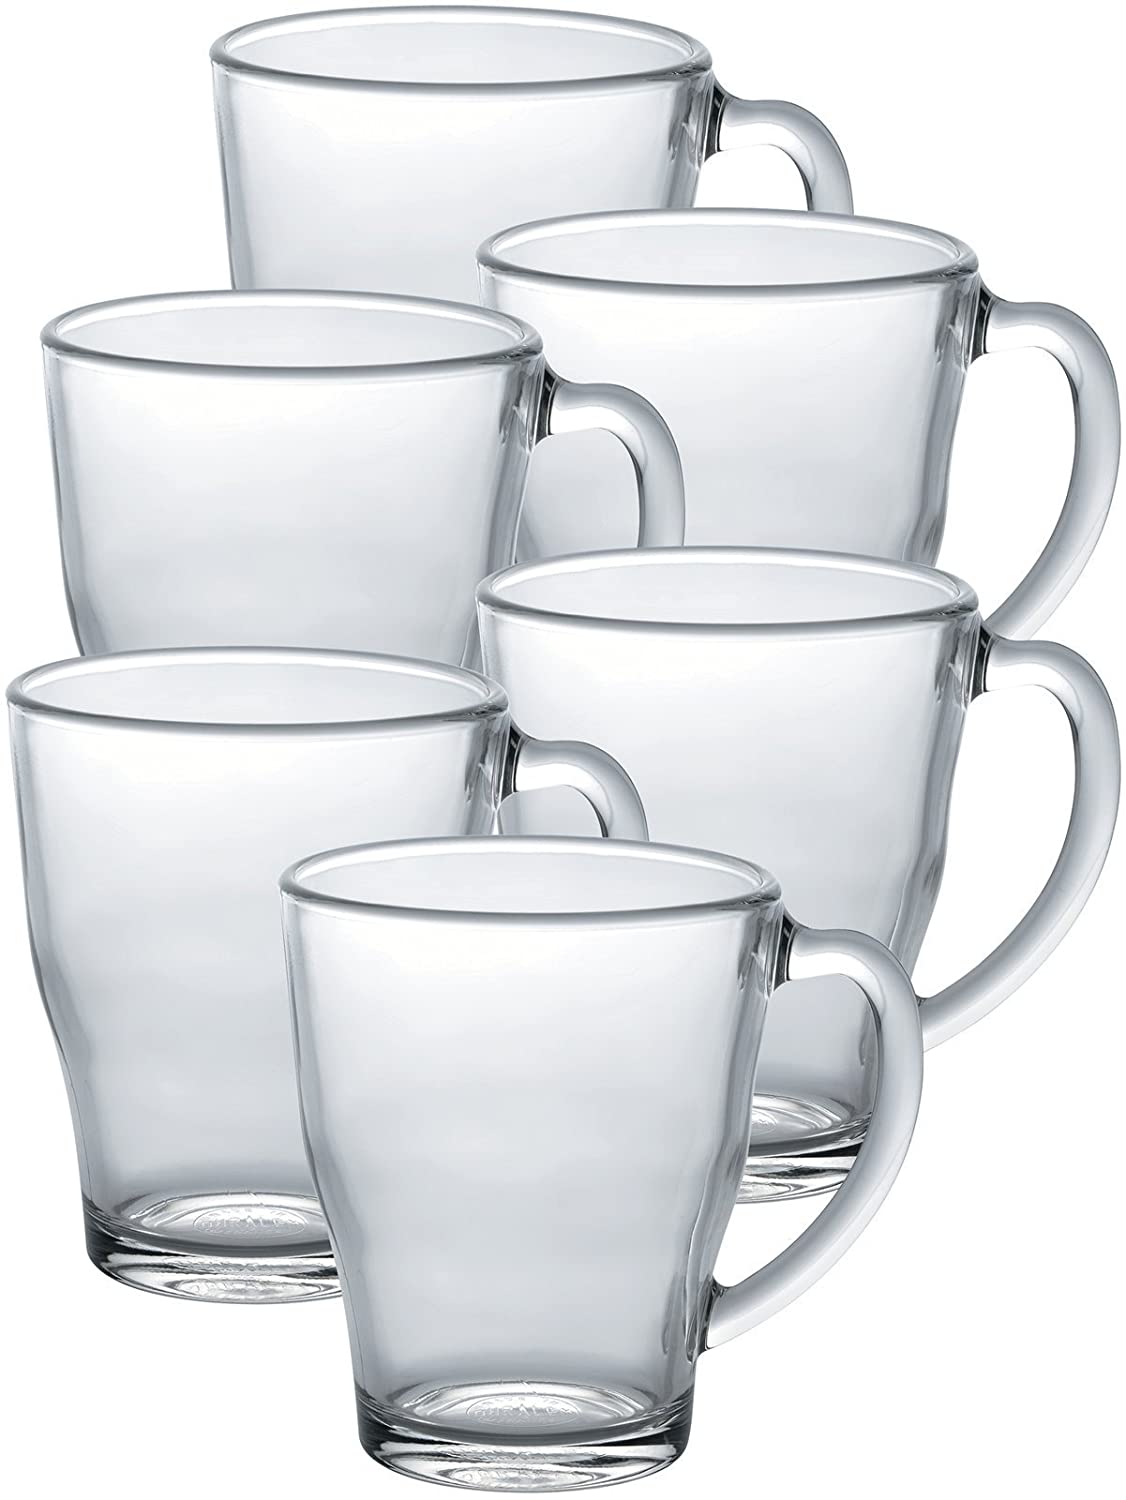 AskTamara: Which mugs are Lead-free? How can I tell if my mug has unsafe  levels of Lead? Which mugs do you use?